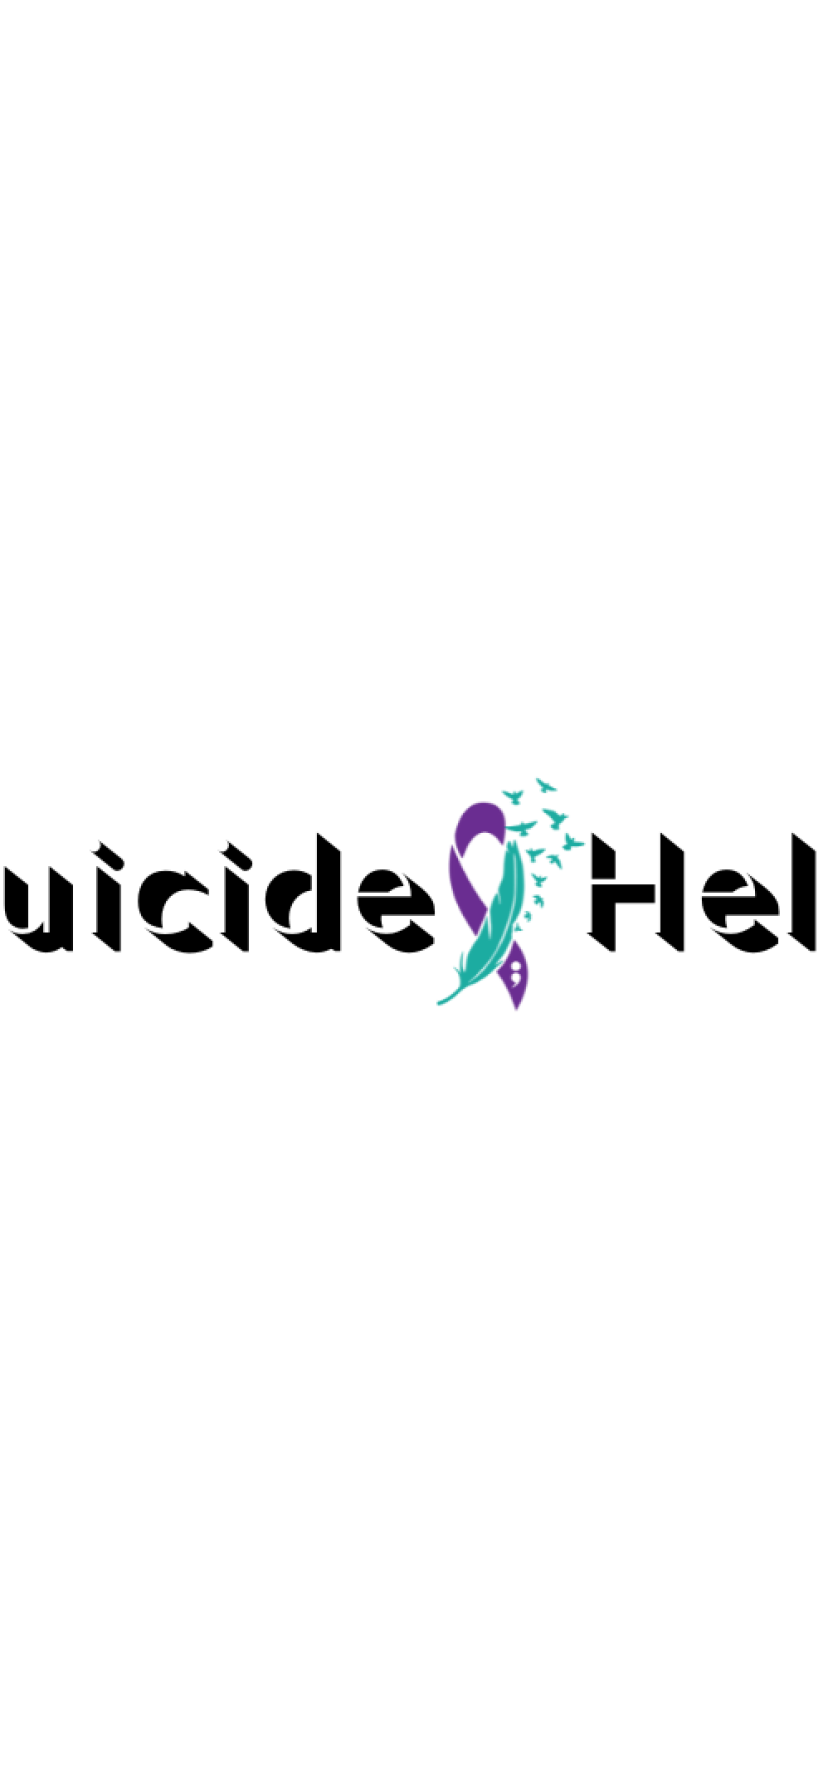 Suicidehelp.org Domain name is for Sale